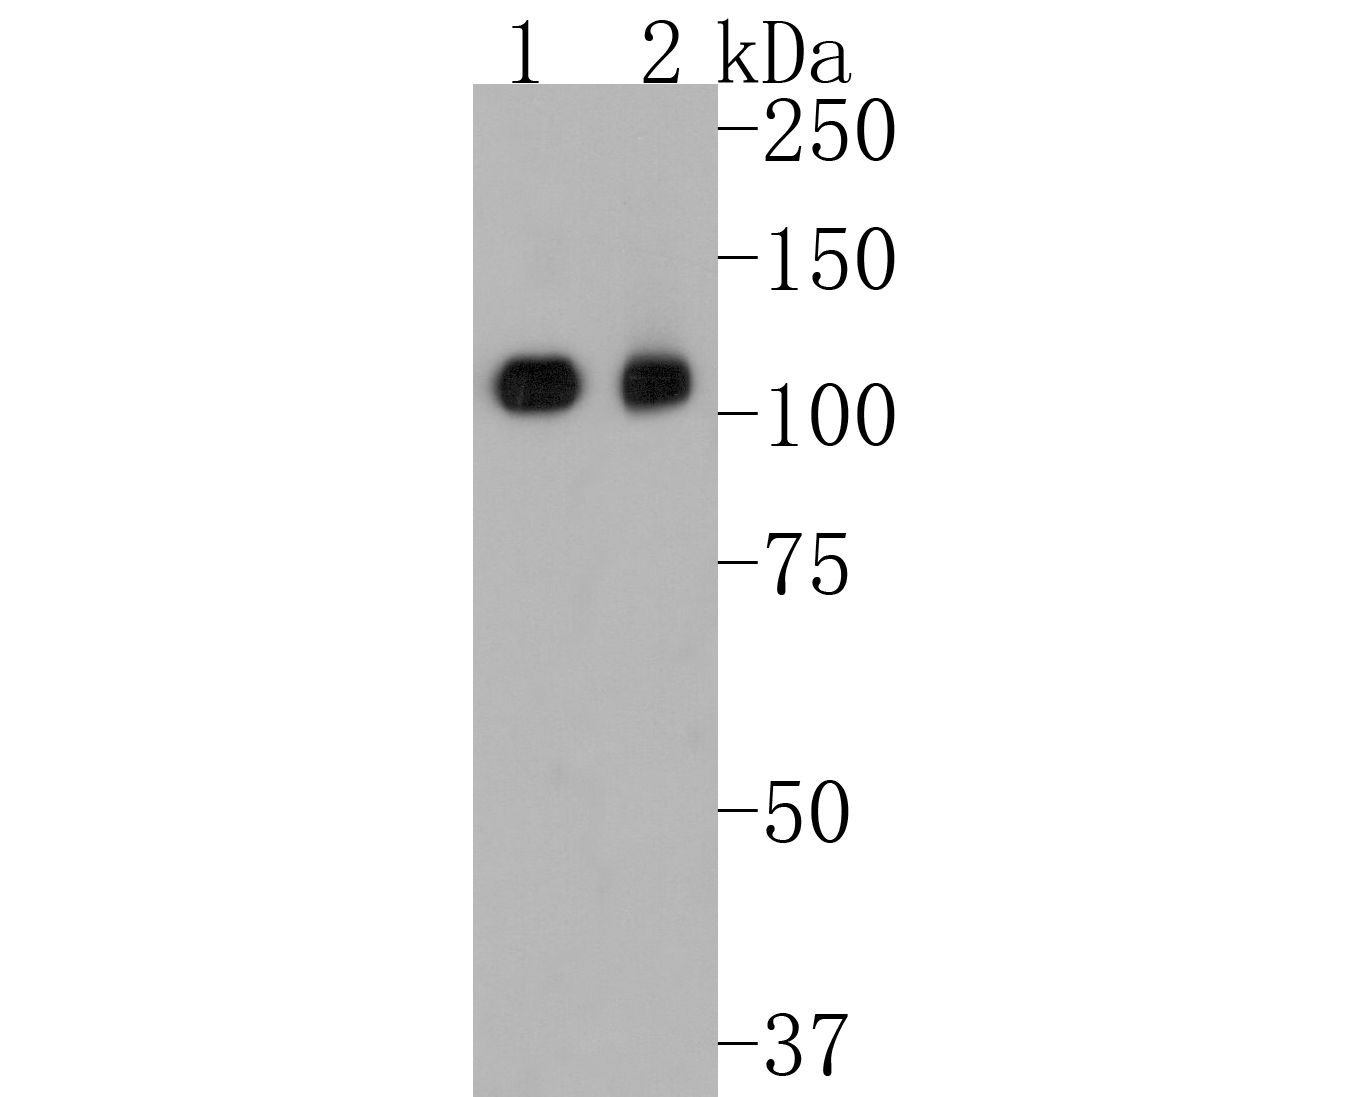 Western blot analysis of KAP1 on different lysates. Proteins were transferred to a PVDF membrane and blocked with 5% BSA in PBS for 1 hour at room temperature. The primary antibody (ET1612-55, 1/500) was used in 5% BSA at room temperature for 2 hours. Goat Anti-Rabbit IgG - HRP Secondary Antibody (HA1001) at 1:5,000 dilution was used for 1 hour at room temperature.<br />
Positive control: <br />
Lane 1: HepG2 cell lysate<br />
Lane 2: Hela cell lysate